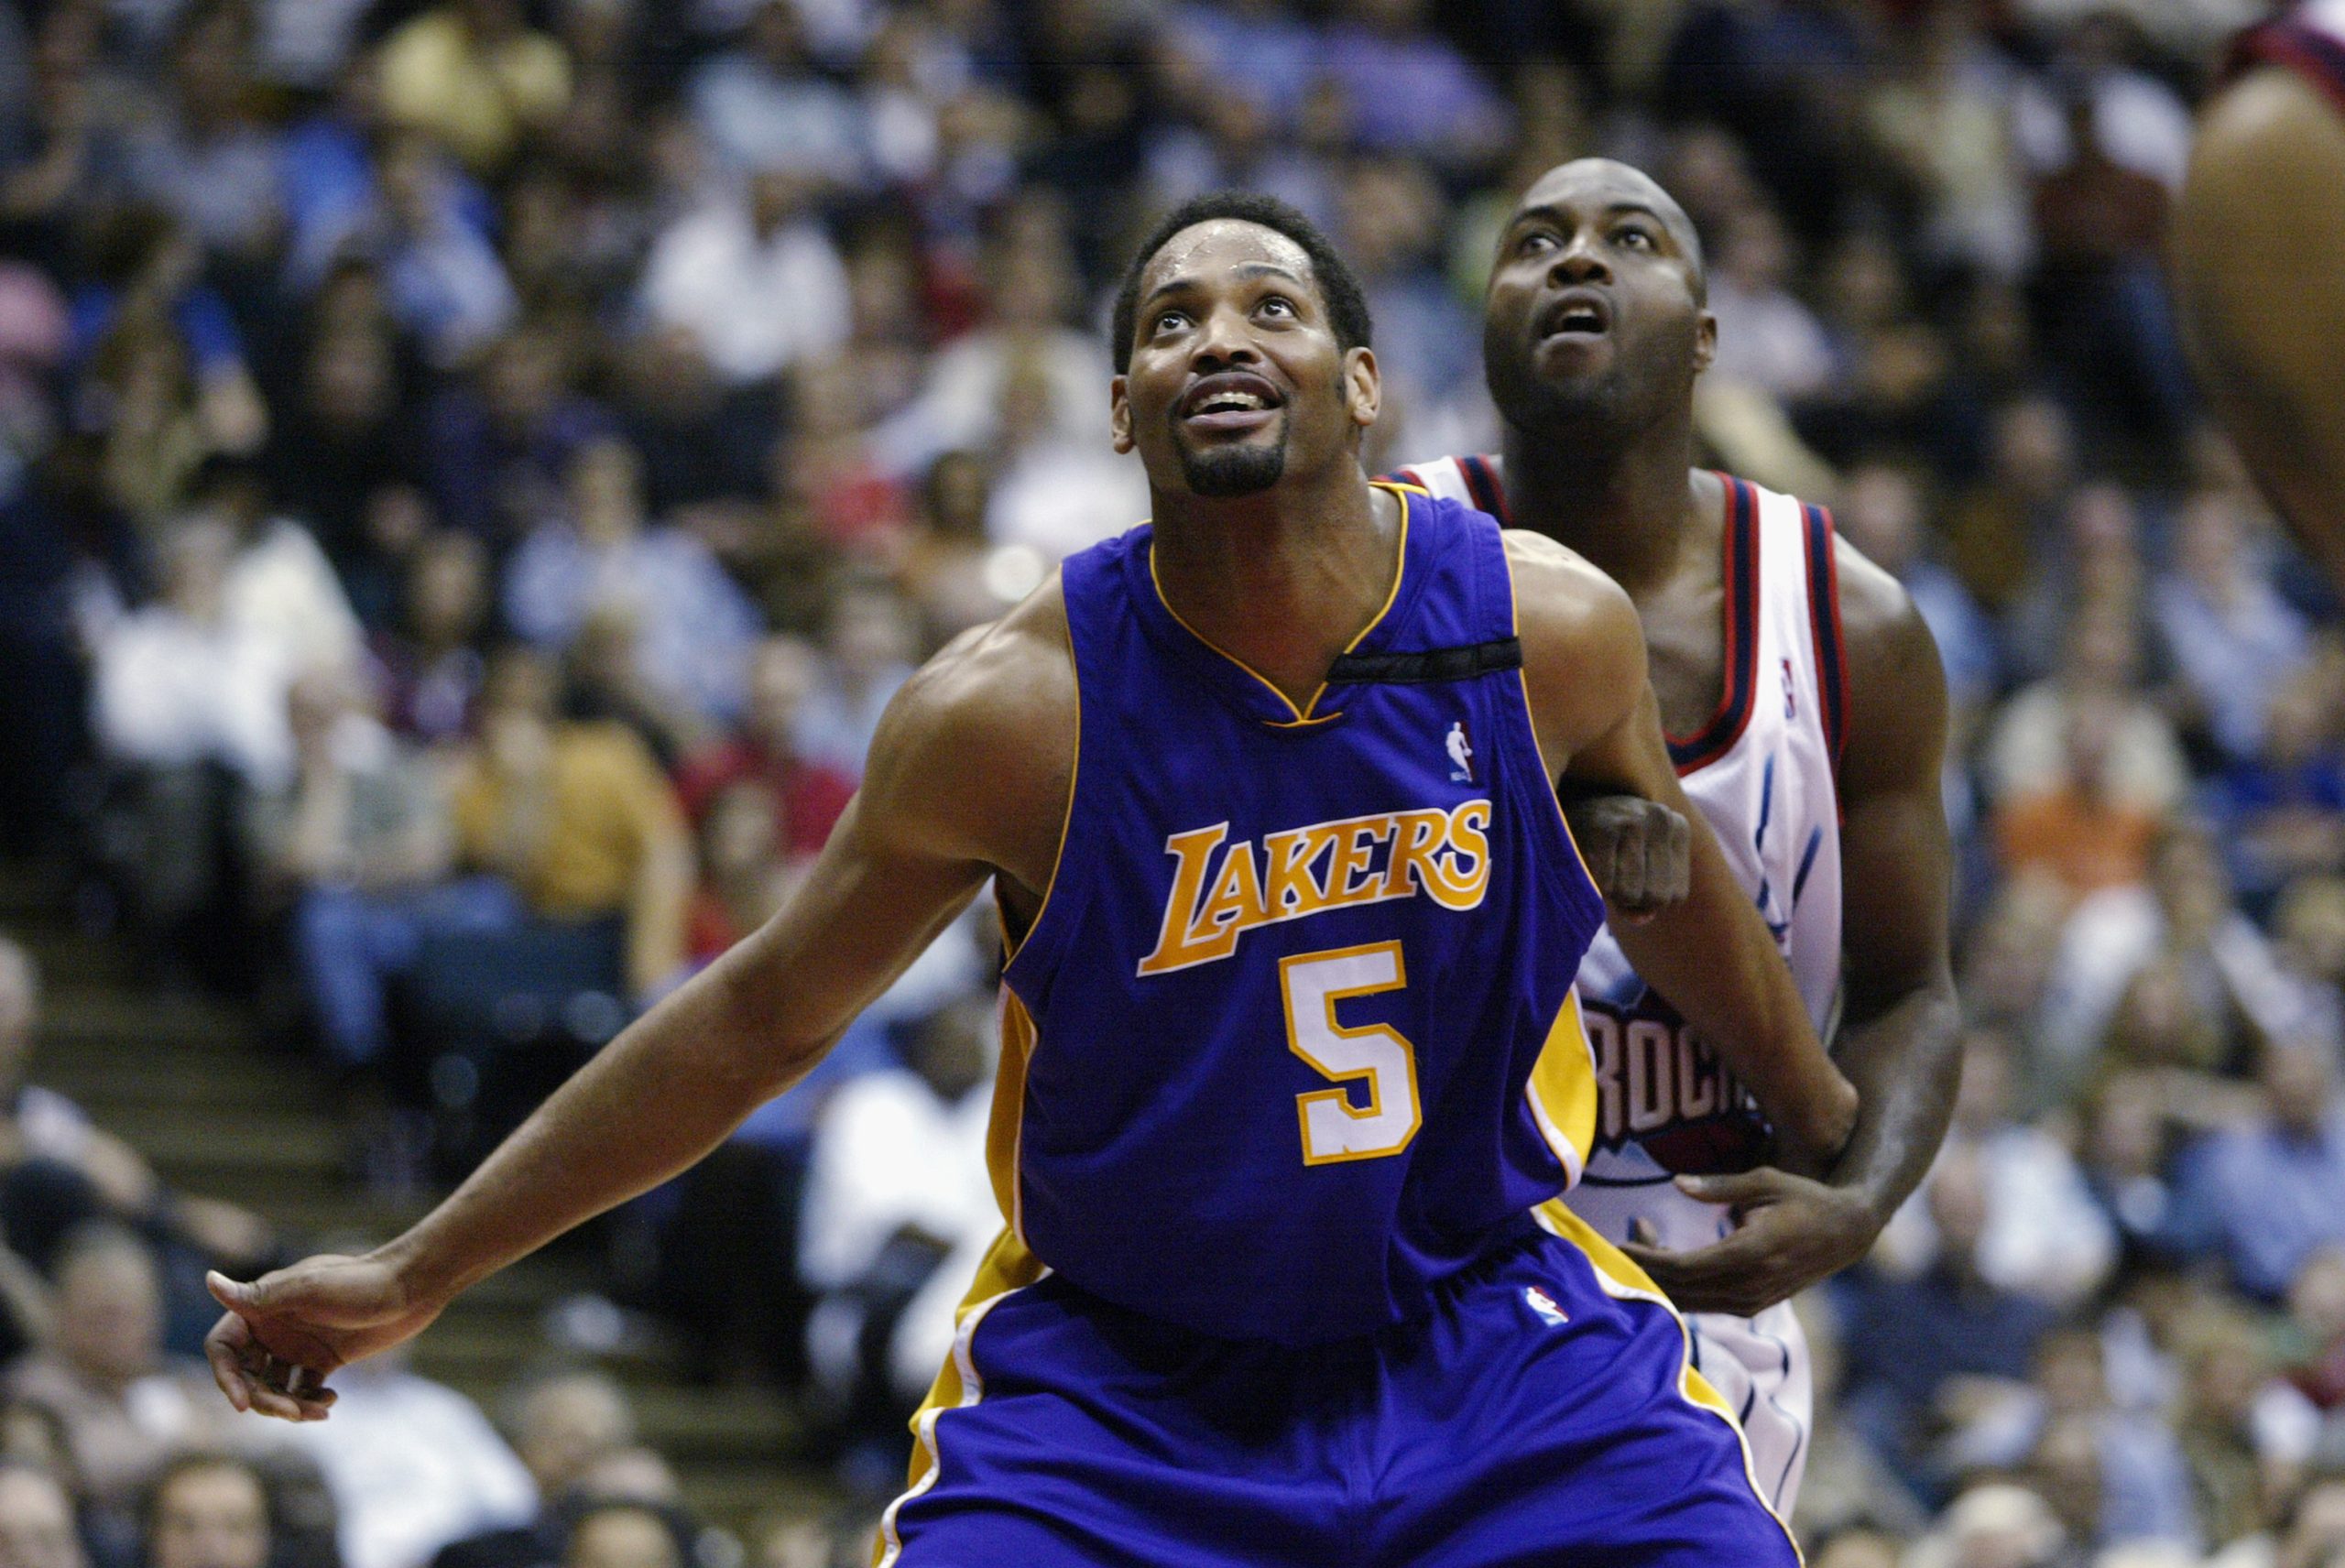 Robert Horry Explains How 12 Reese’s Peanut Butter Cups Set Him on the Path to Success